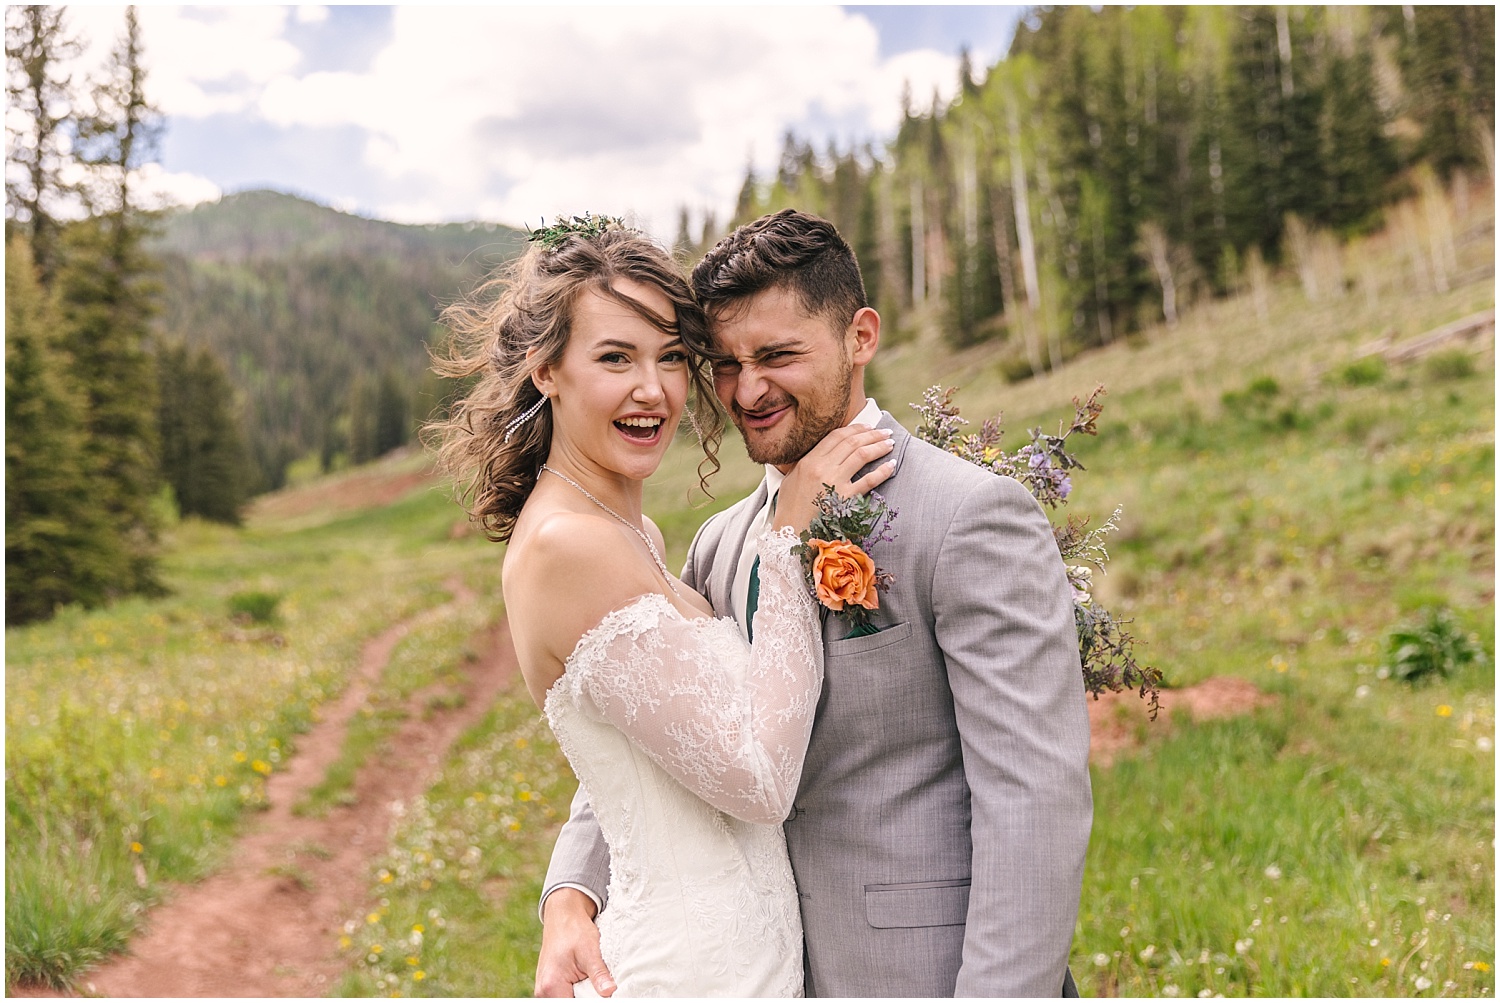 Silly bride and groom portraits in a field at Telluride wedding